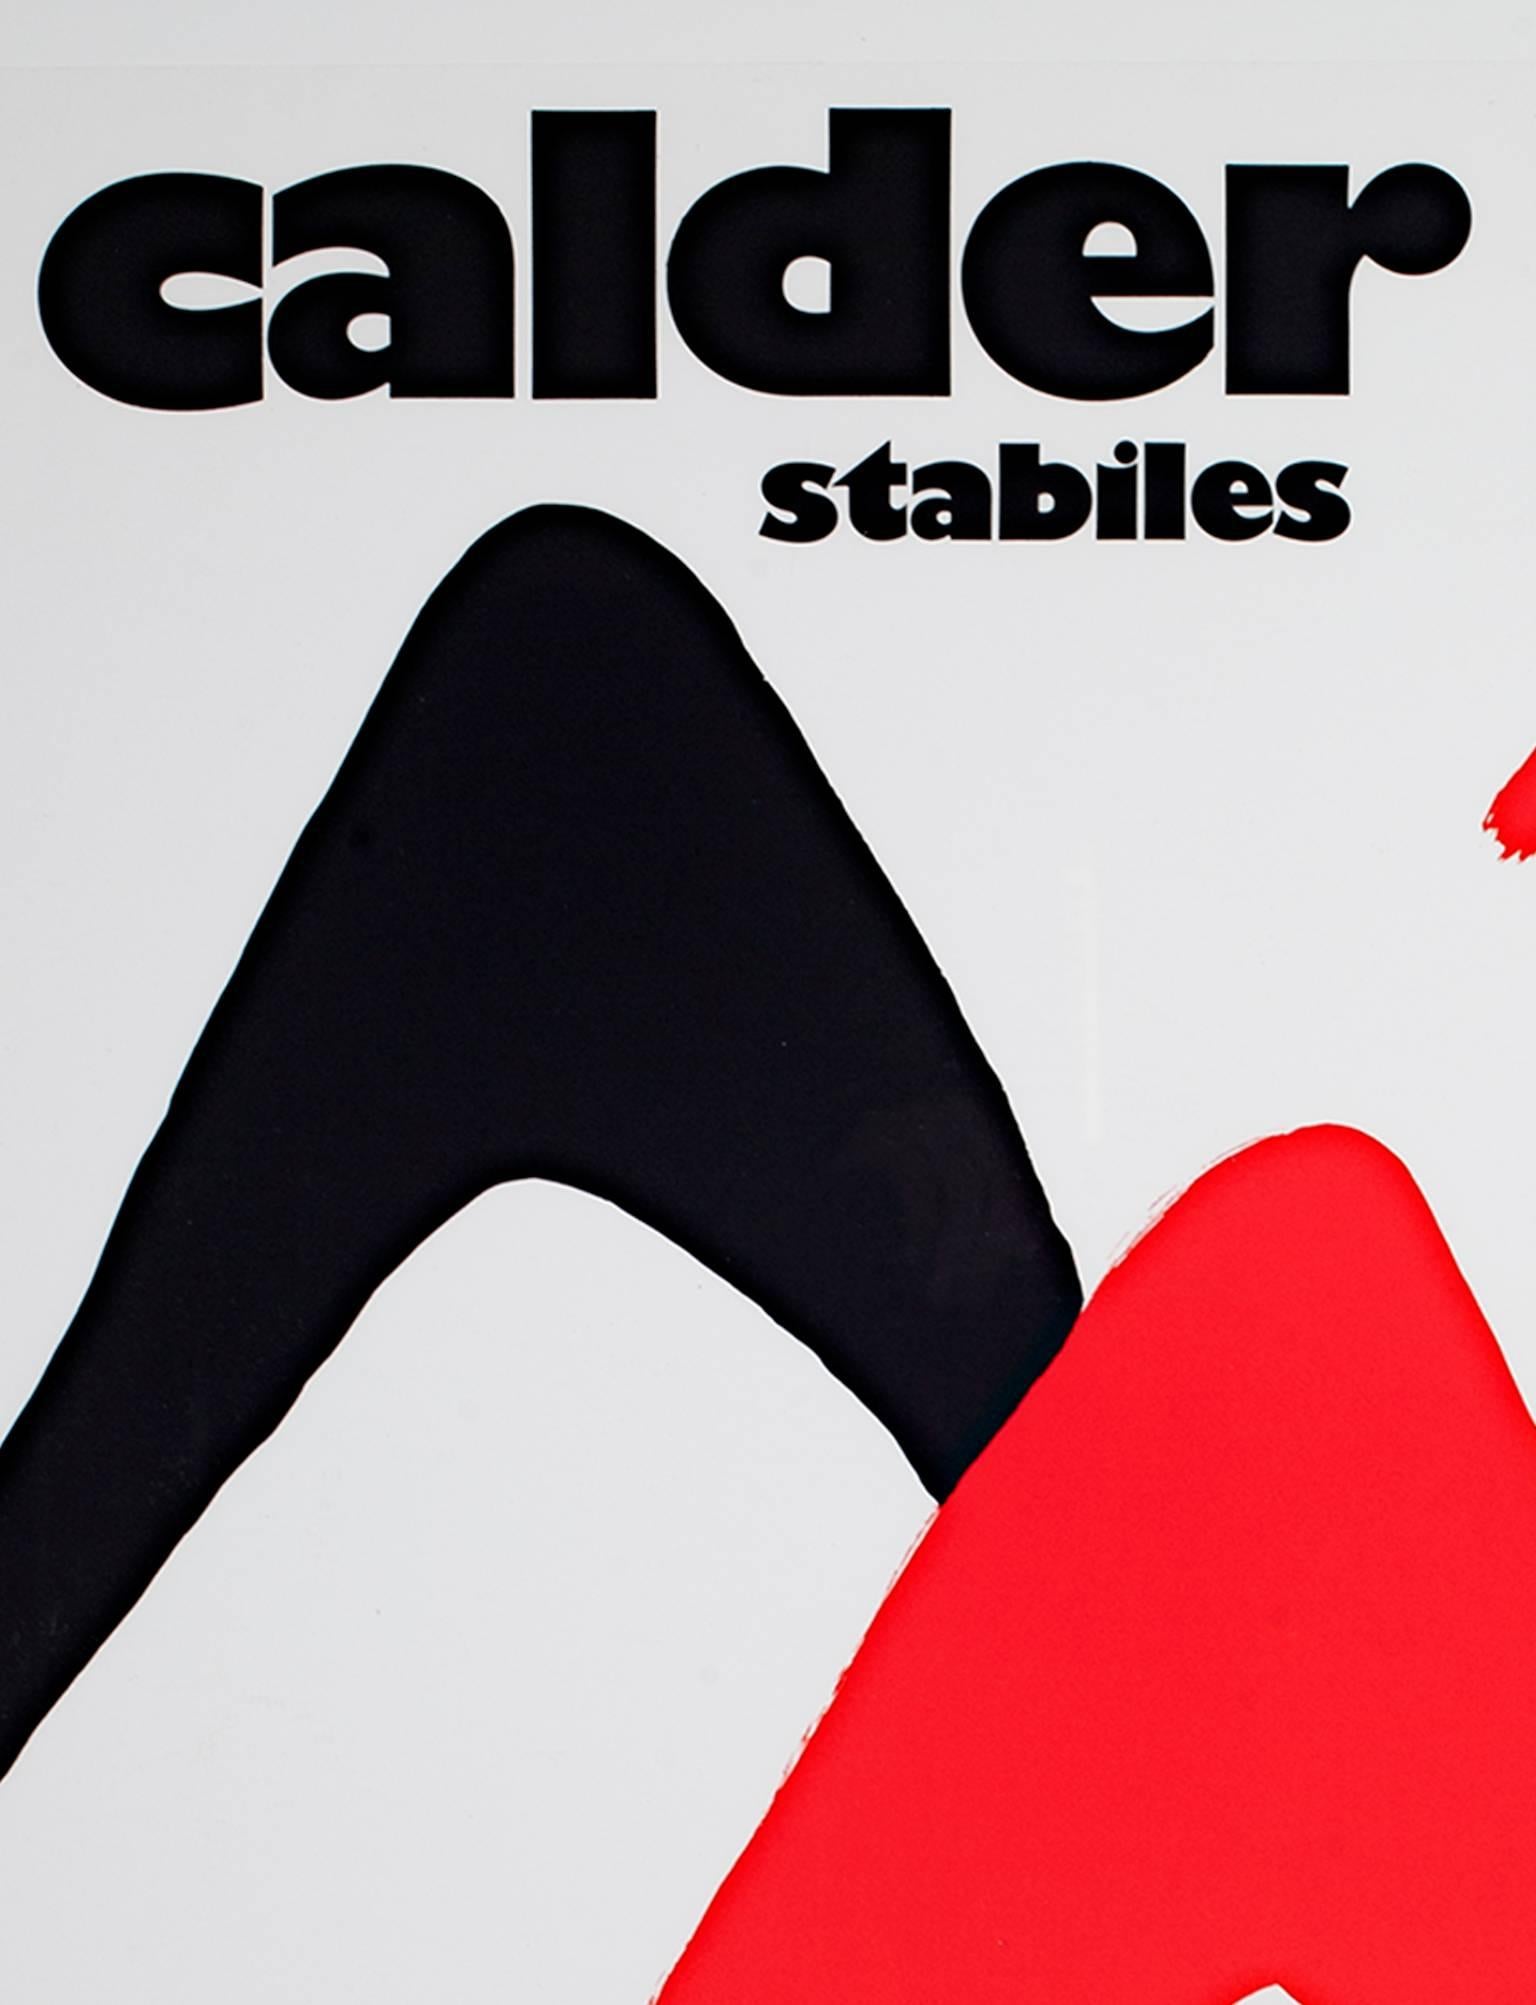 'Stabiles' is an original lithograph poster after Alexander Calder and published by Galerie Maeght in 1971. Calder had produced the stones for this lithograph a year earlier in 1970 for a print entitled 'Boomerangs,' which was signed in pencil and